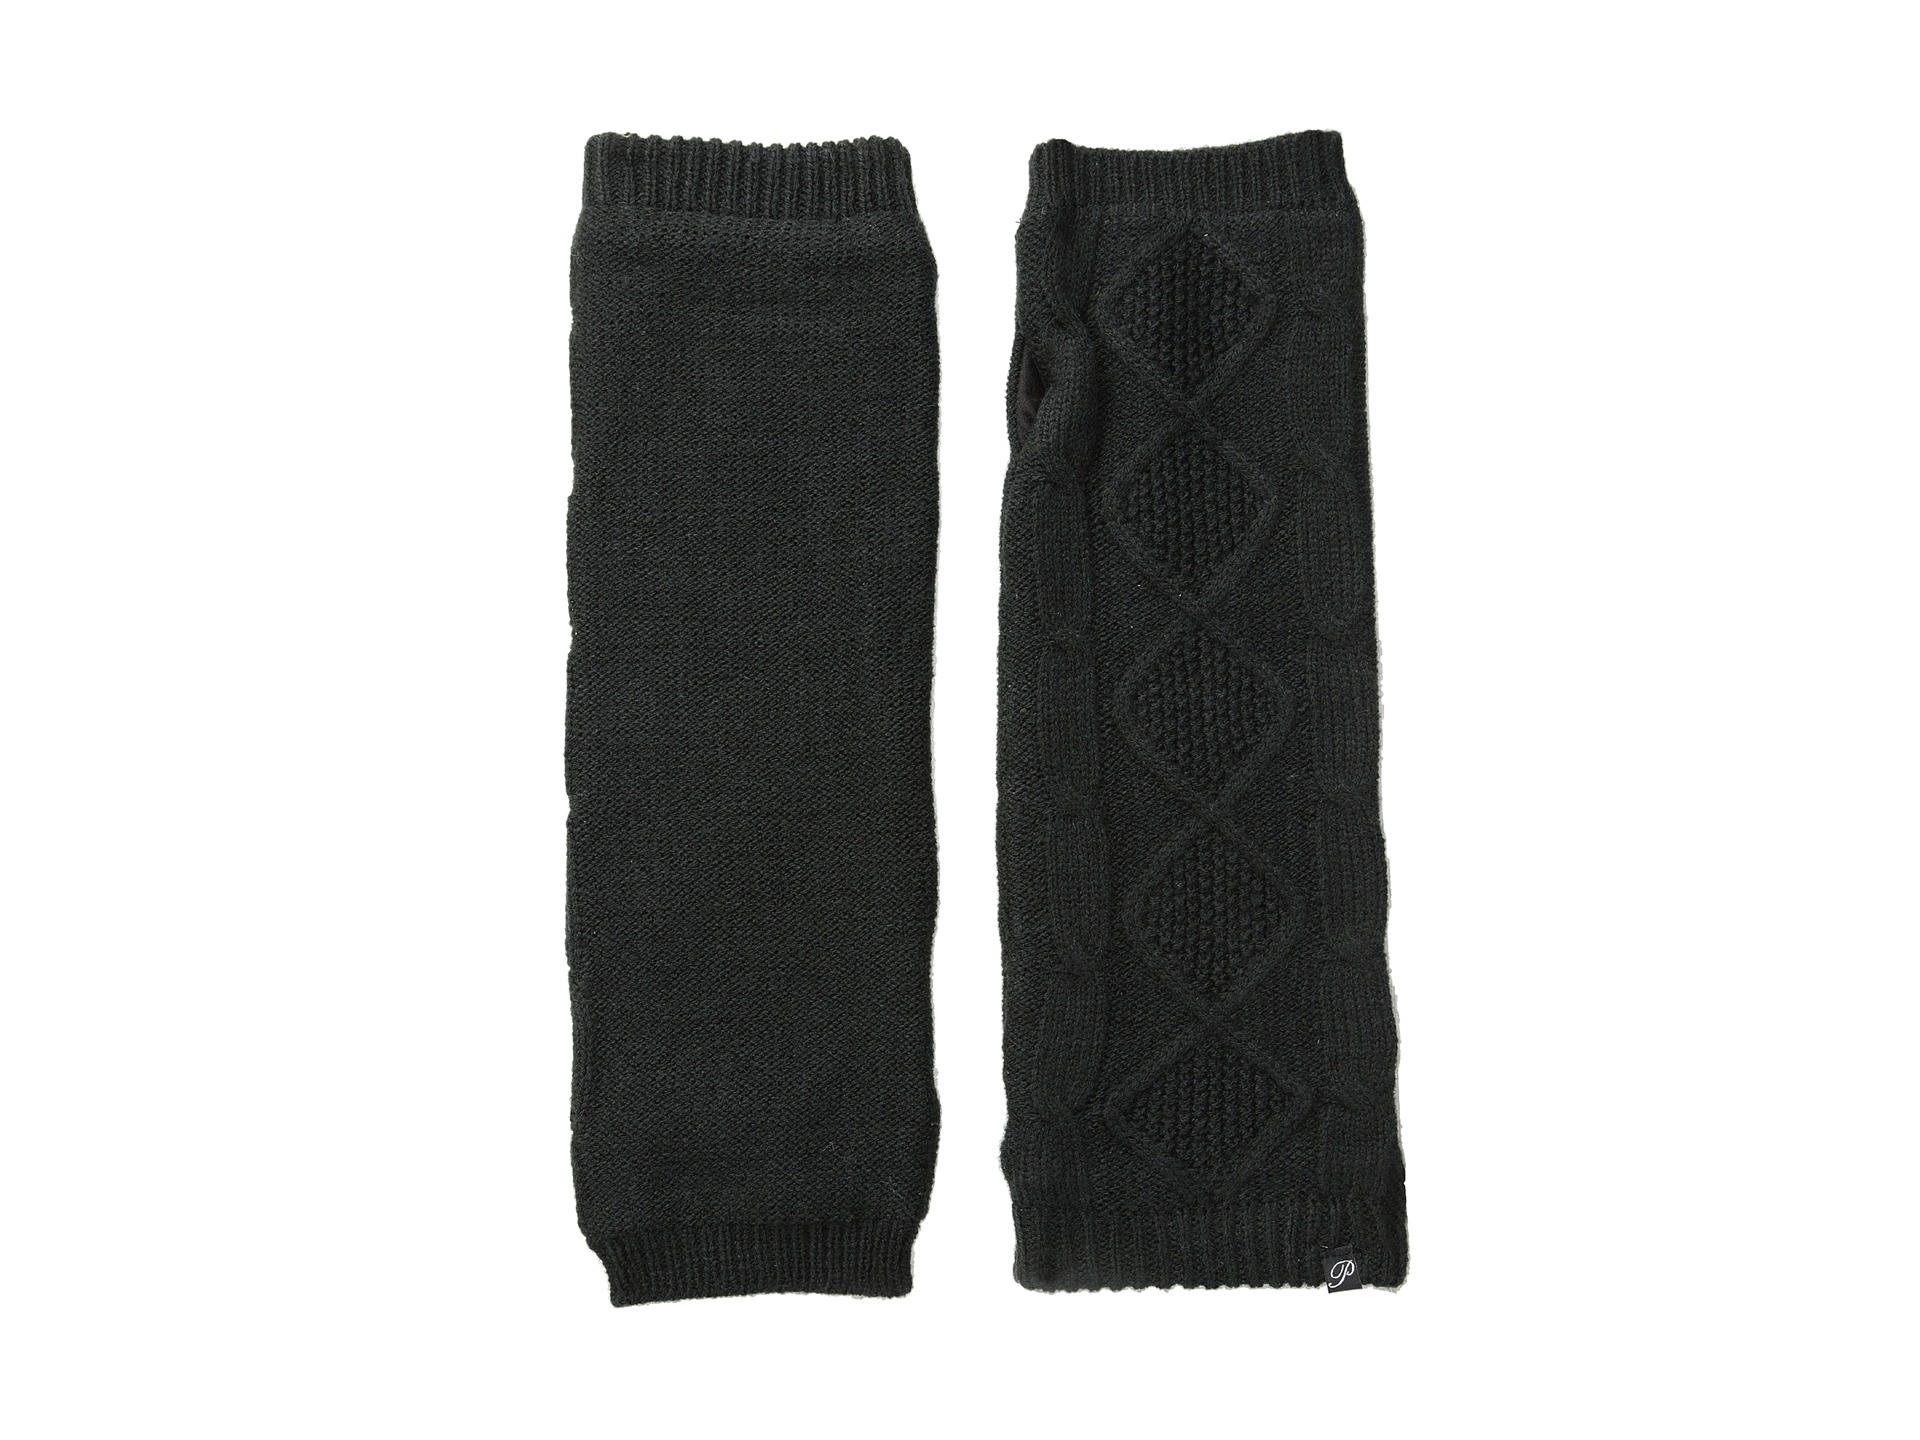 ... Fleece Lined Cable Knit Arm Warmer Black | Shipped Free at Zappos